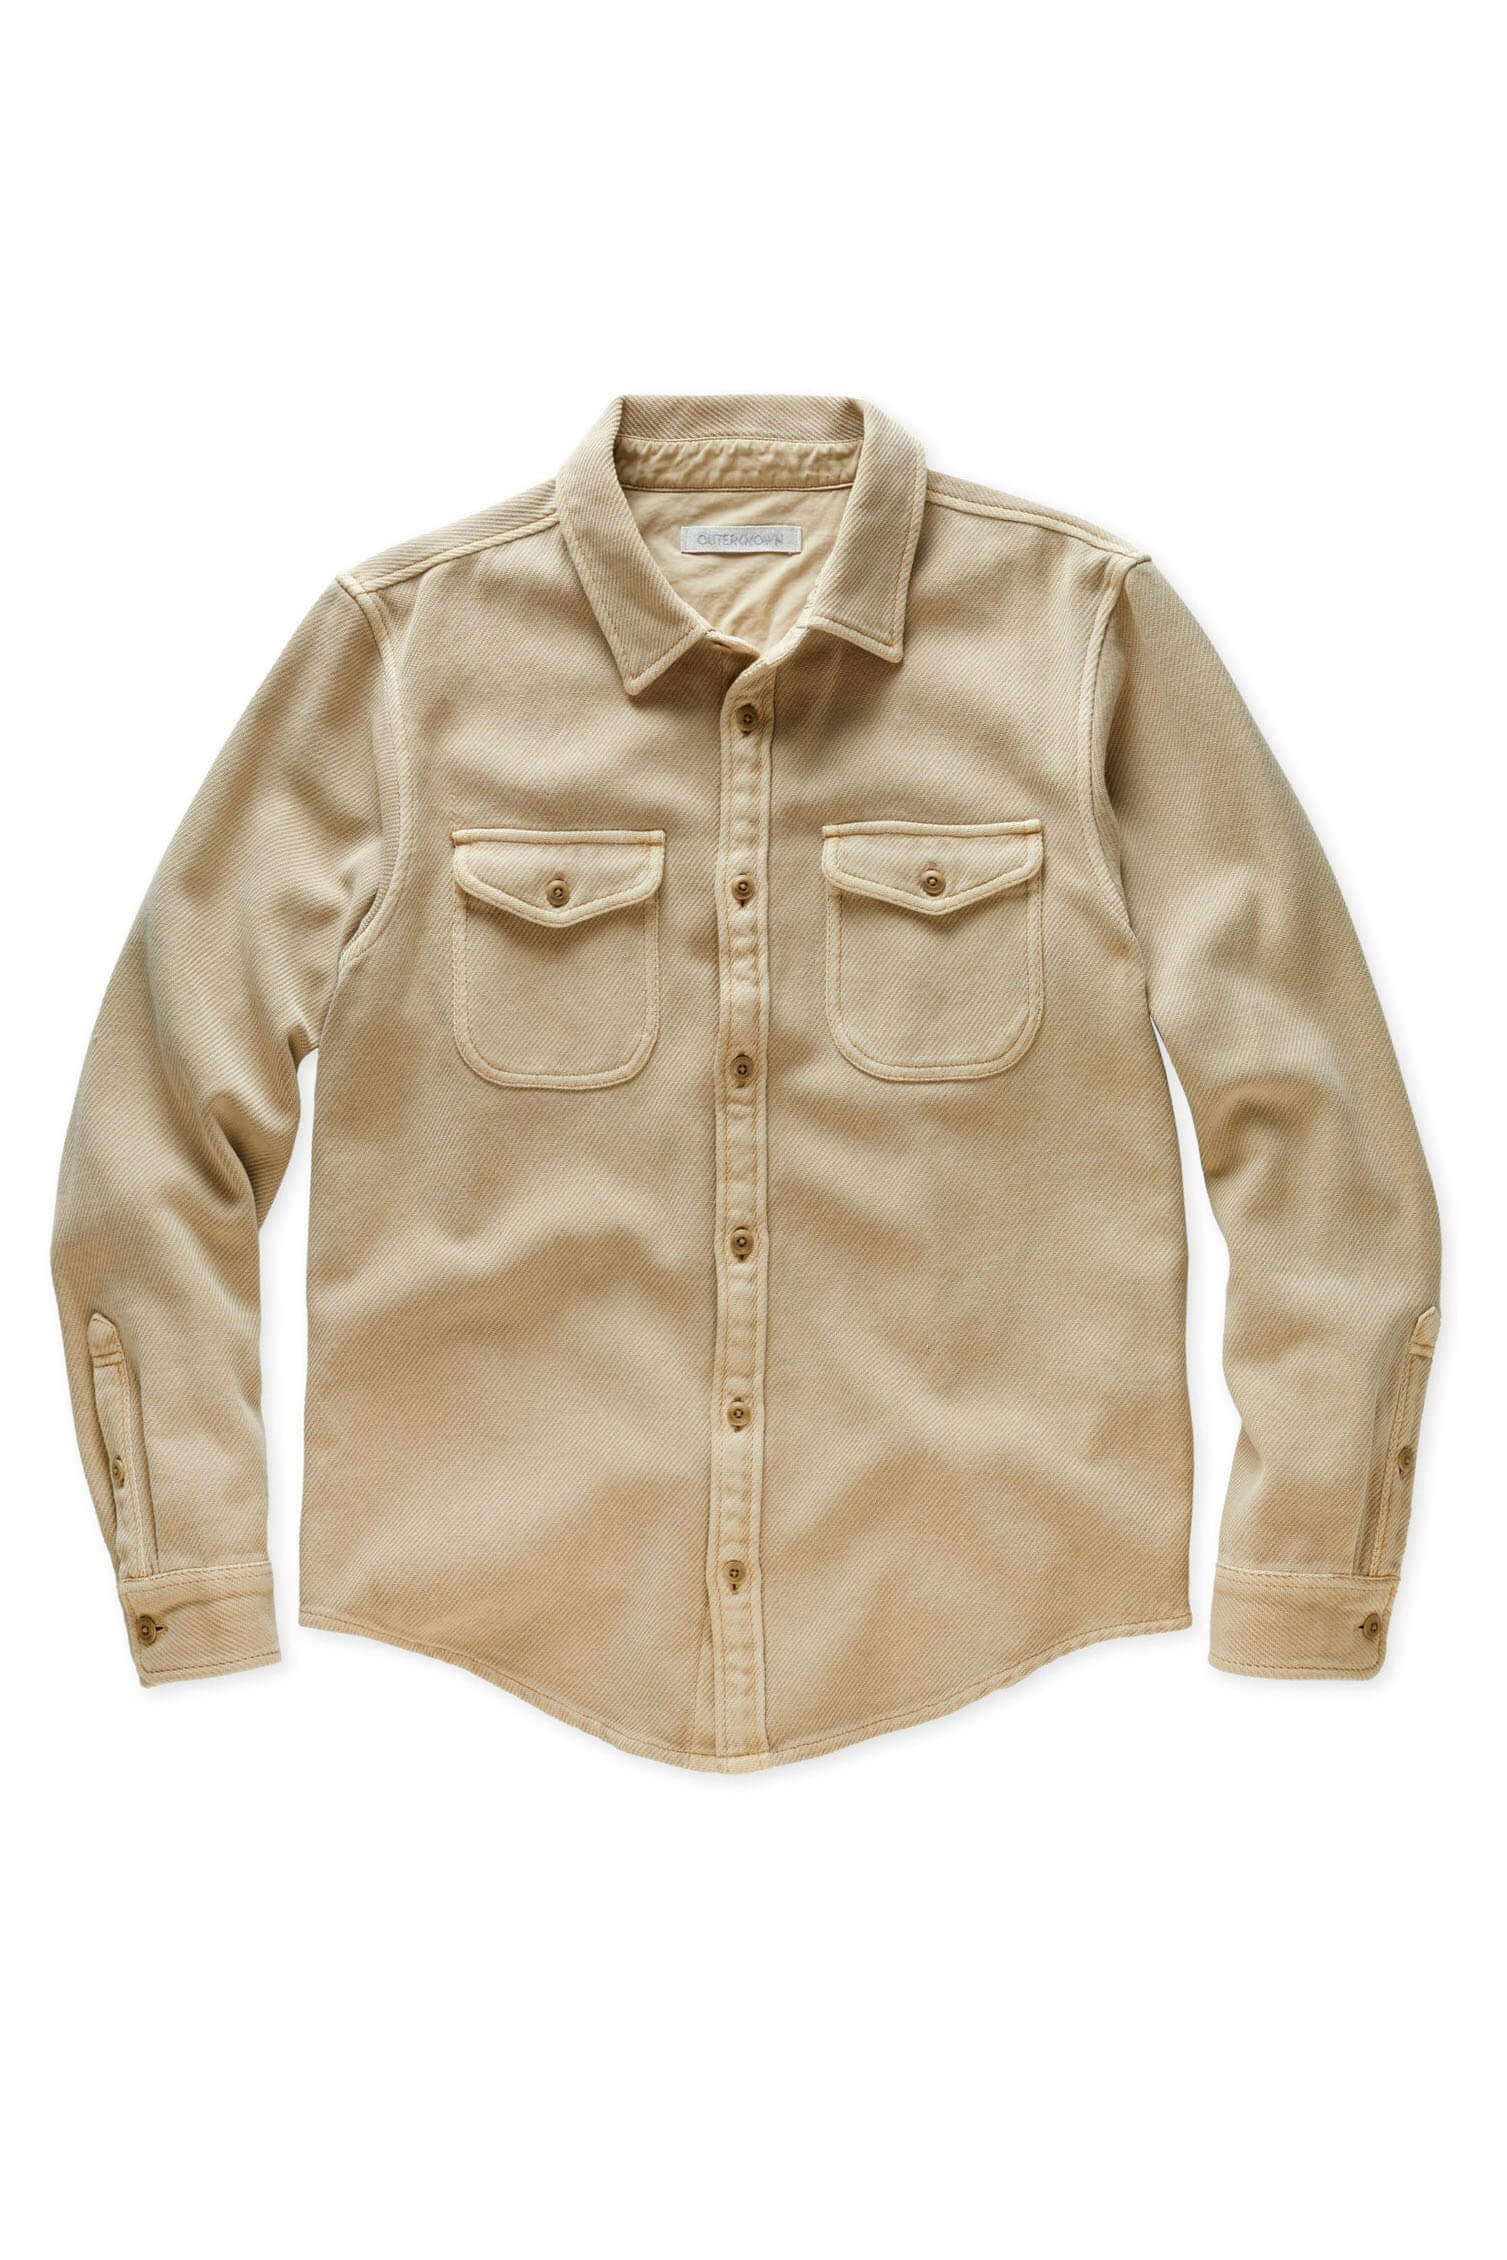 Outerknown Chroma Blanket Shirt in clay